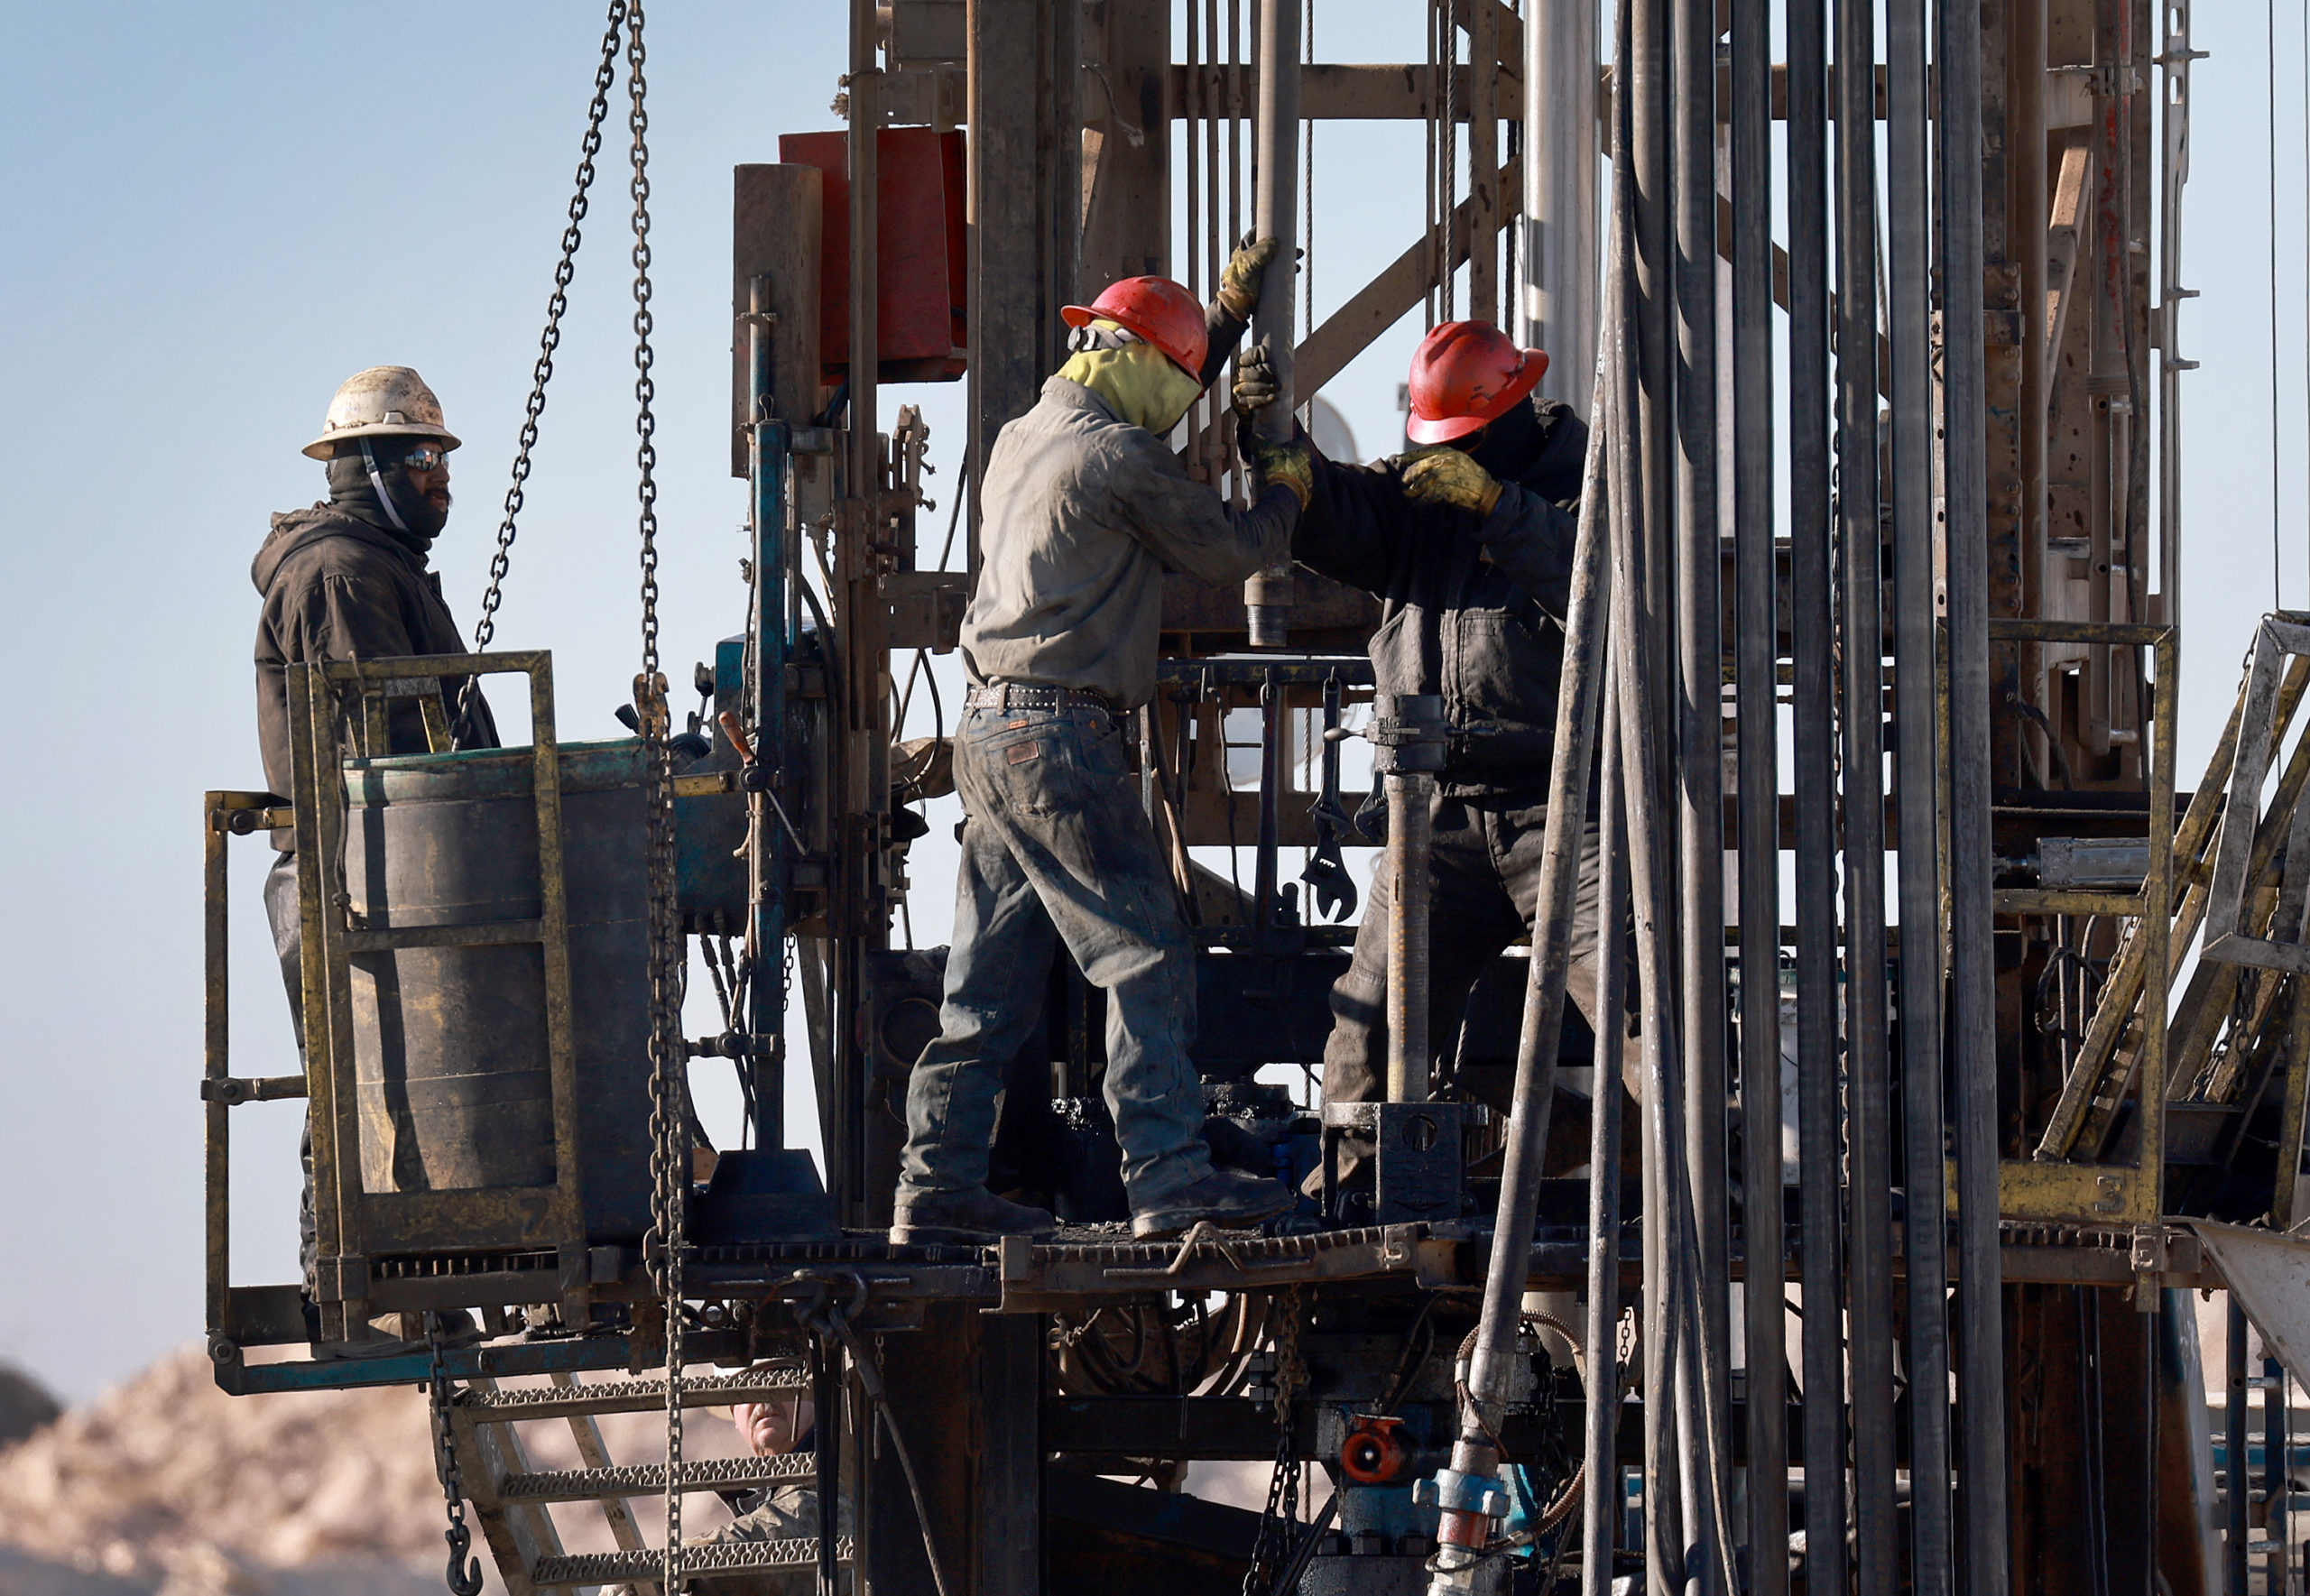 Workers place pipe into the ground on an oil drilling rig set up in the Permian Basin oil field on March 12 in Midland, Texas. (Joe Raedle/Getty Images)